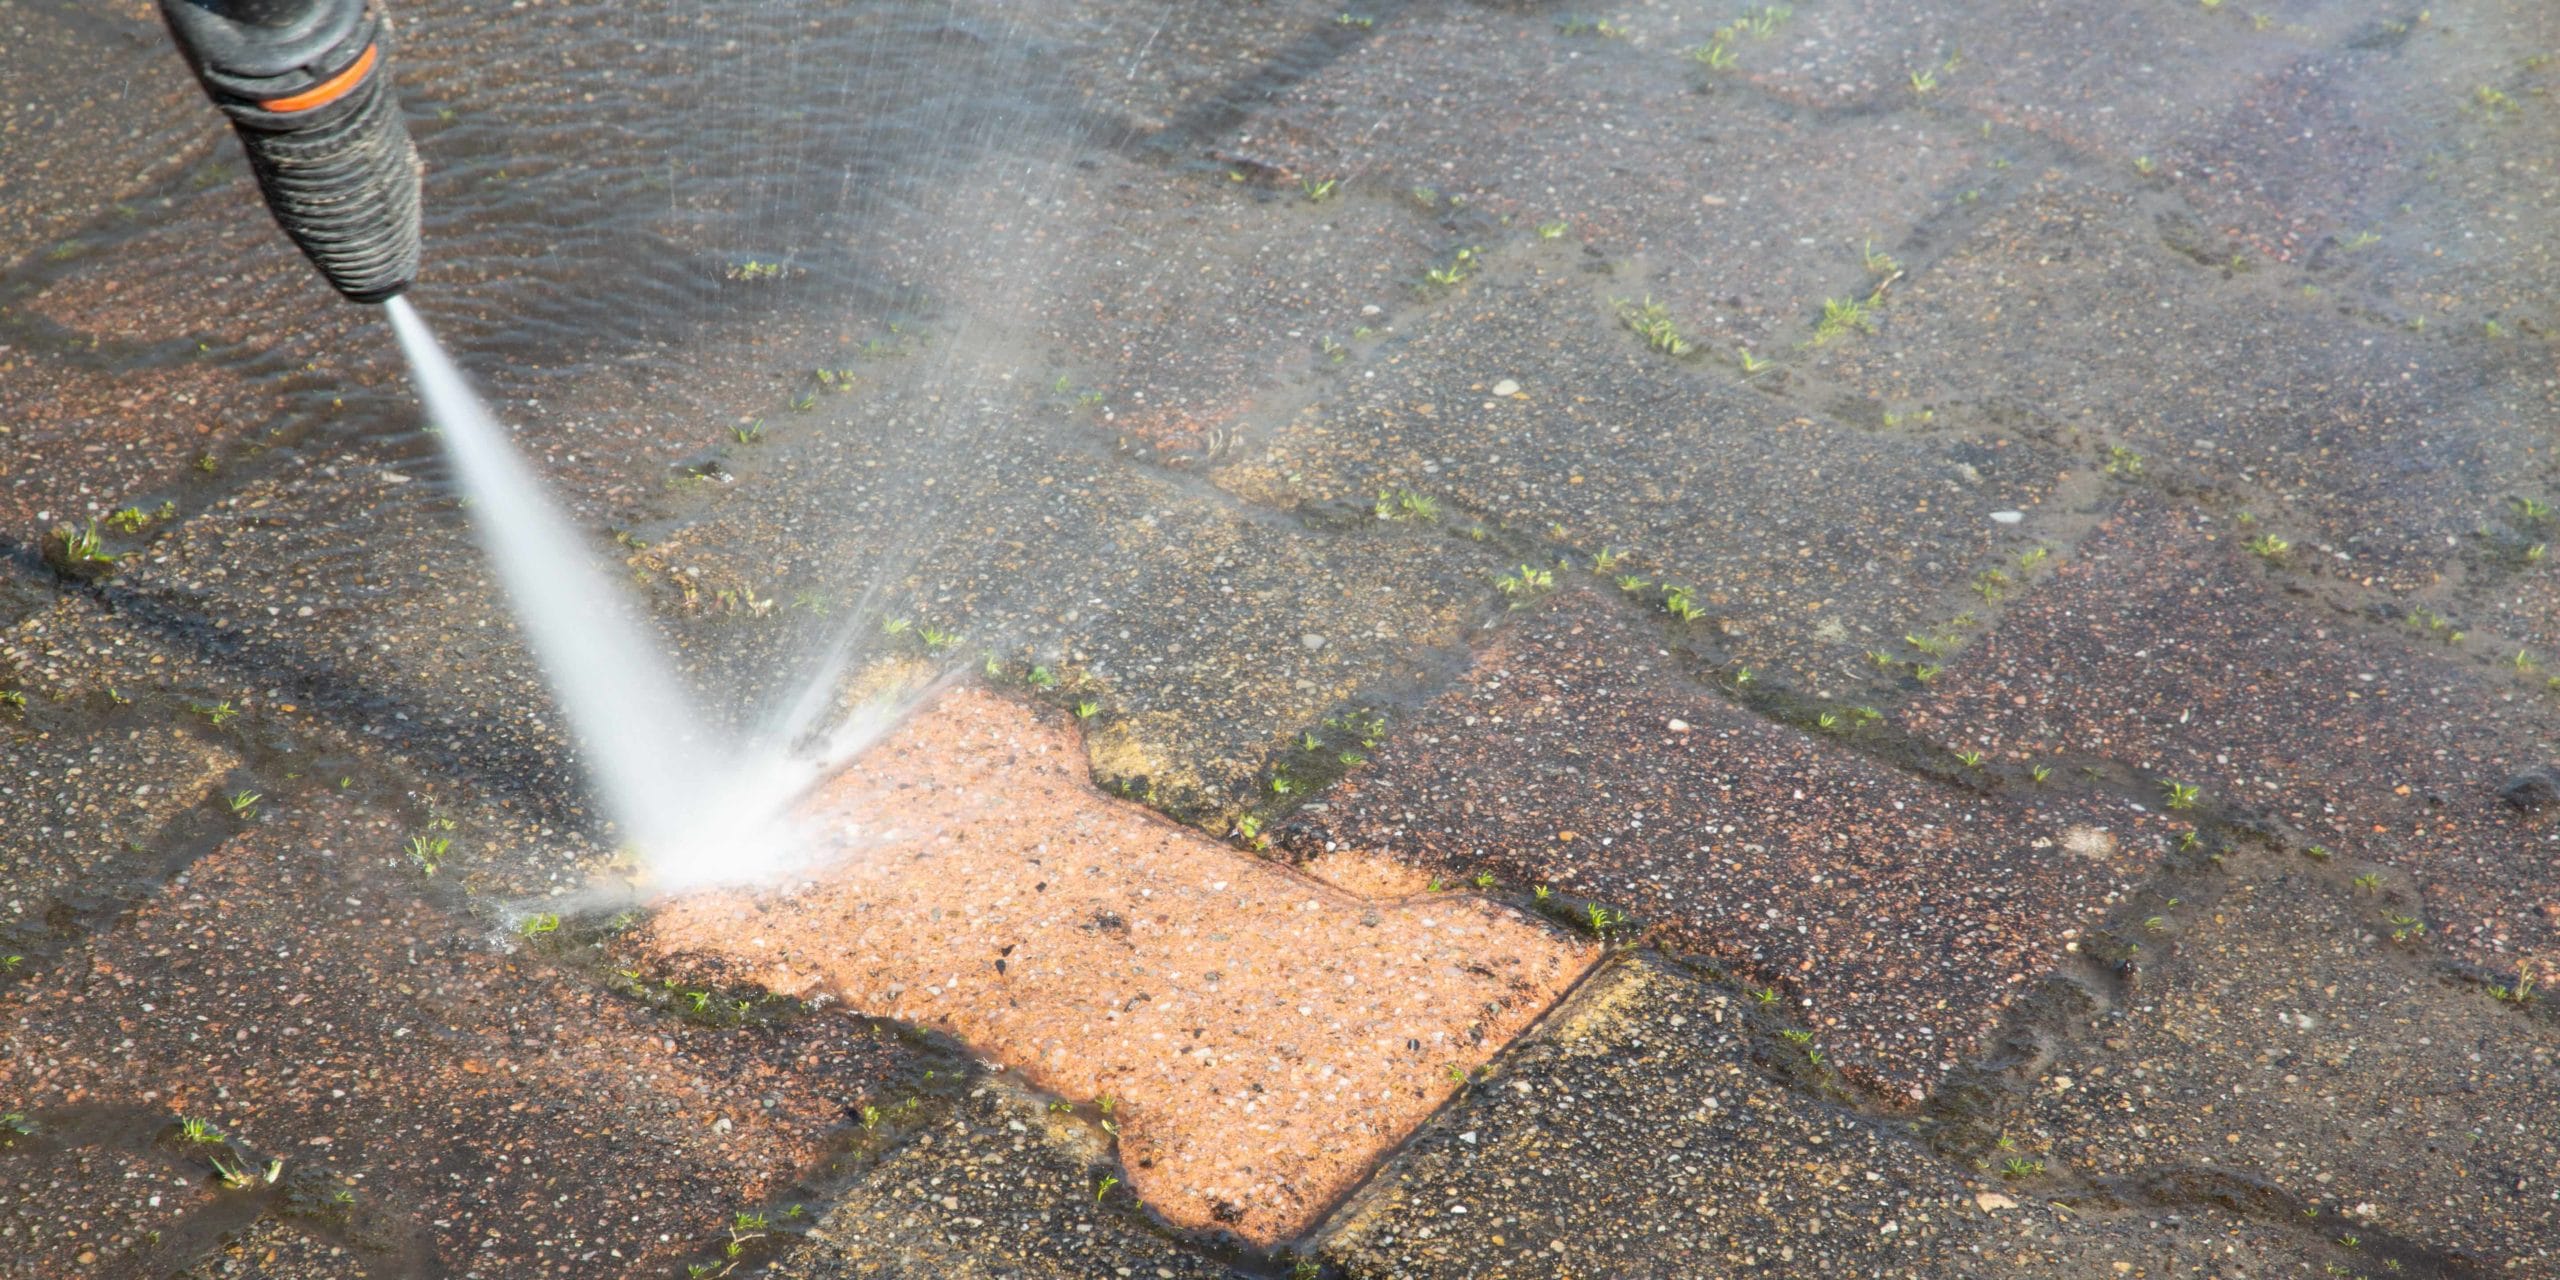 Pressure Wash A Deck Or Patio In 5, How To Use A Pressure Washer Clean Patio